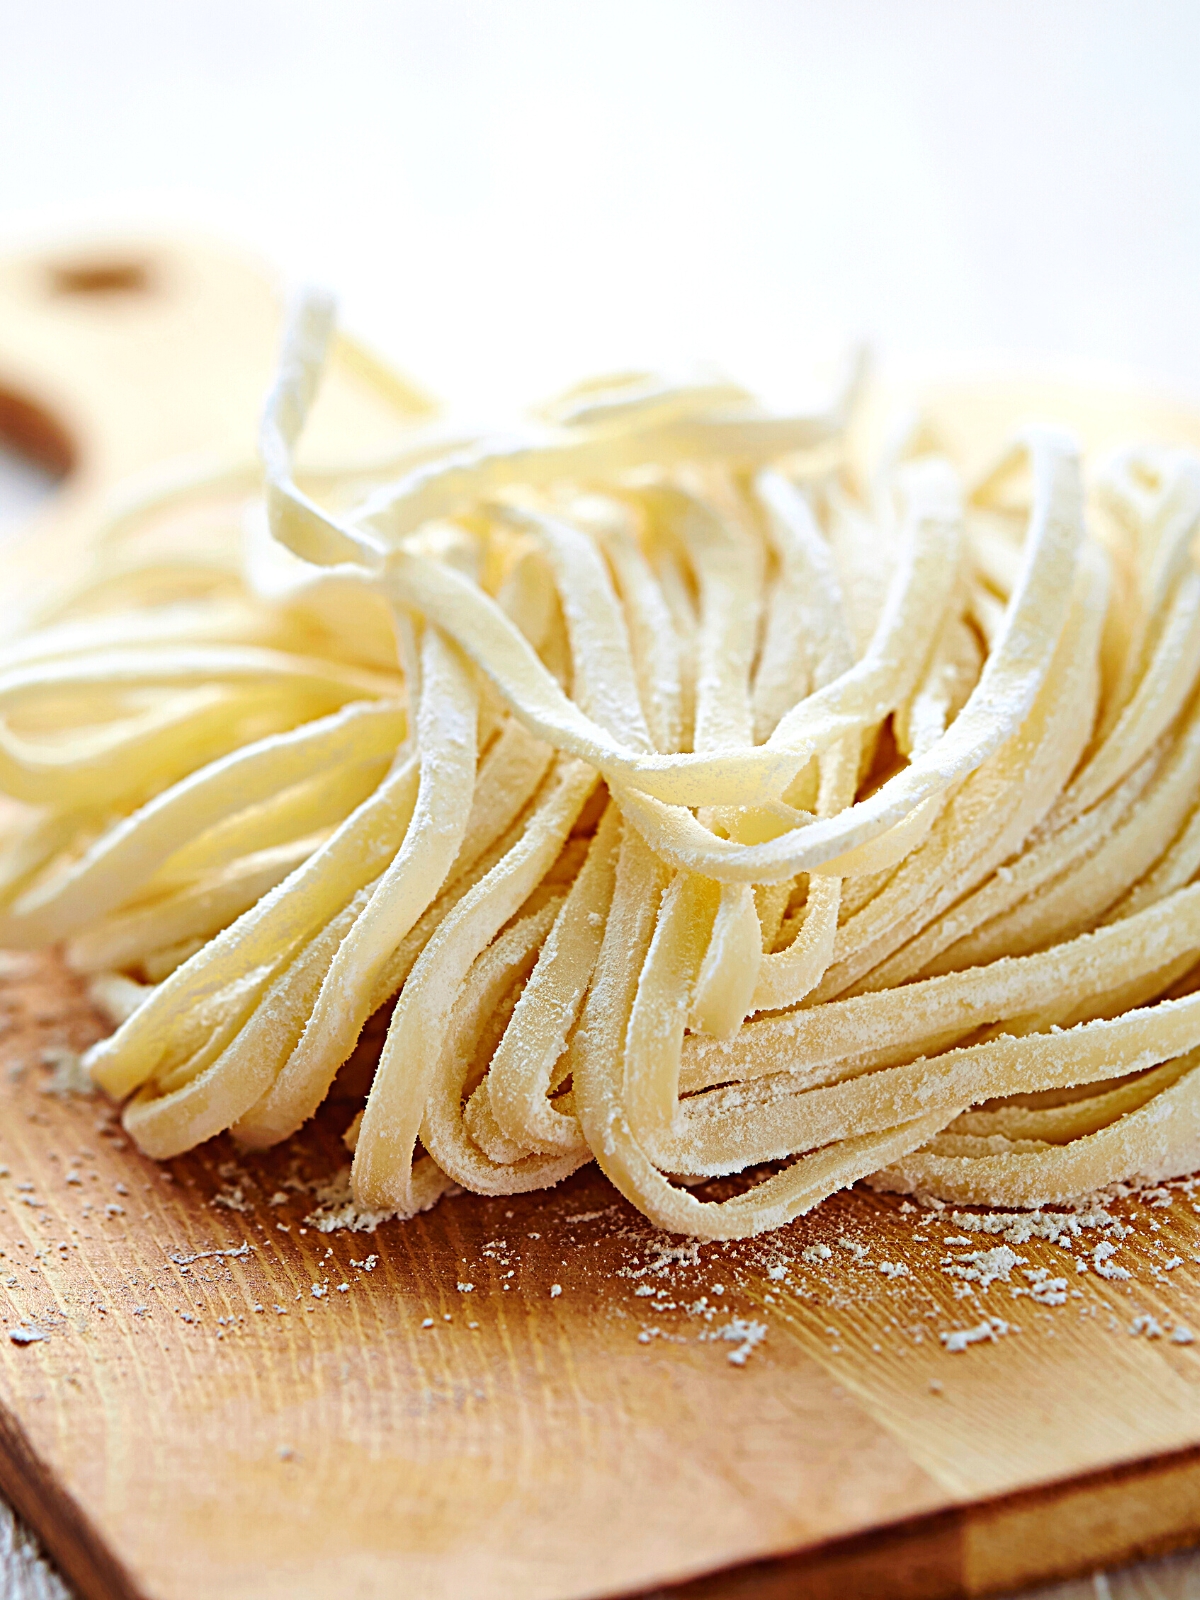 Use Udon Noodles as an alternative to Rice Noodles